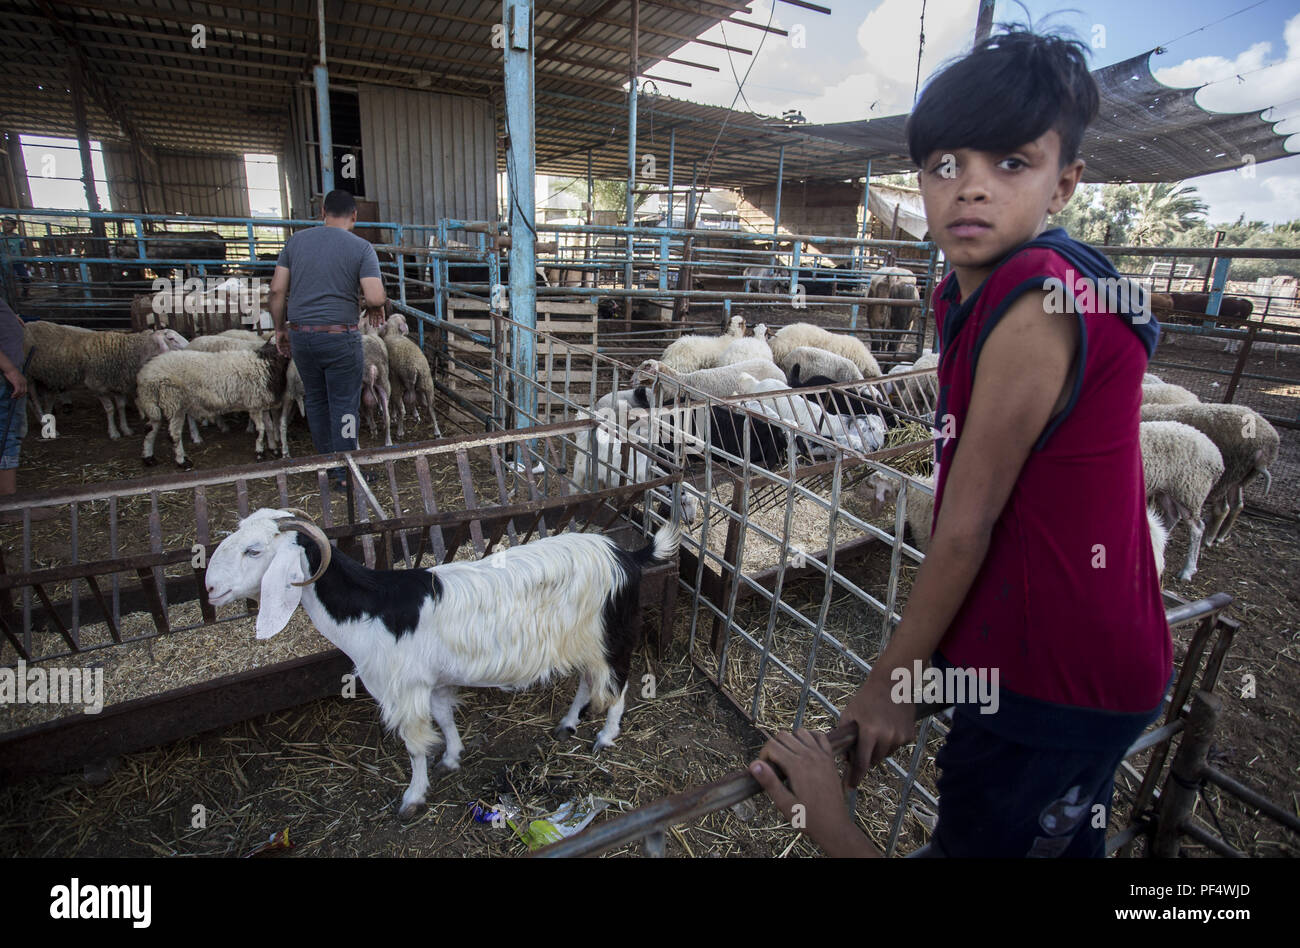 Gaza City, The Gaza Strip, Gaza. 18th Aug, 2018. A child seen trying to choose a goat to be sacrificed during eid.Palestinians gather in a cattle shop to purchase cattles to be sacrificed. before Eid al-Adha in the east of Jabalya refugee camp. Eid al-Adha (Festival of Sacrifice) is celebrated throughout the Islamic world as the commemoration of Abraham's will to sacrifice his son for God, cows, camels, goats and sheep are traditionally slaughtered on the Holy Day. Credit: Mahmoud Issa/SOPA Images/ZUMA Wire/Alamy Live News Stock Photo